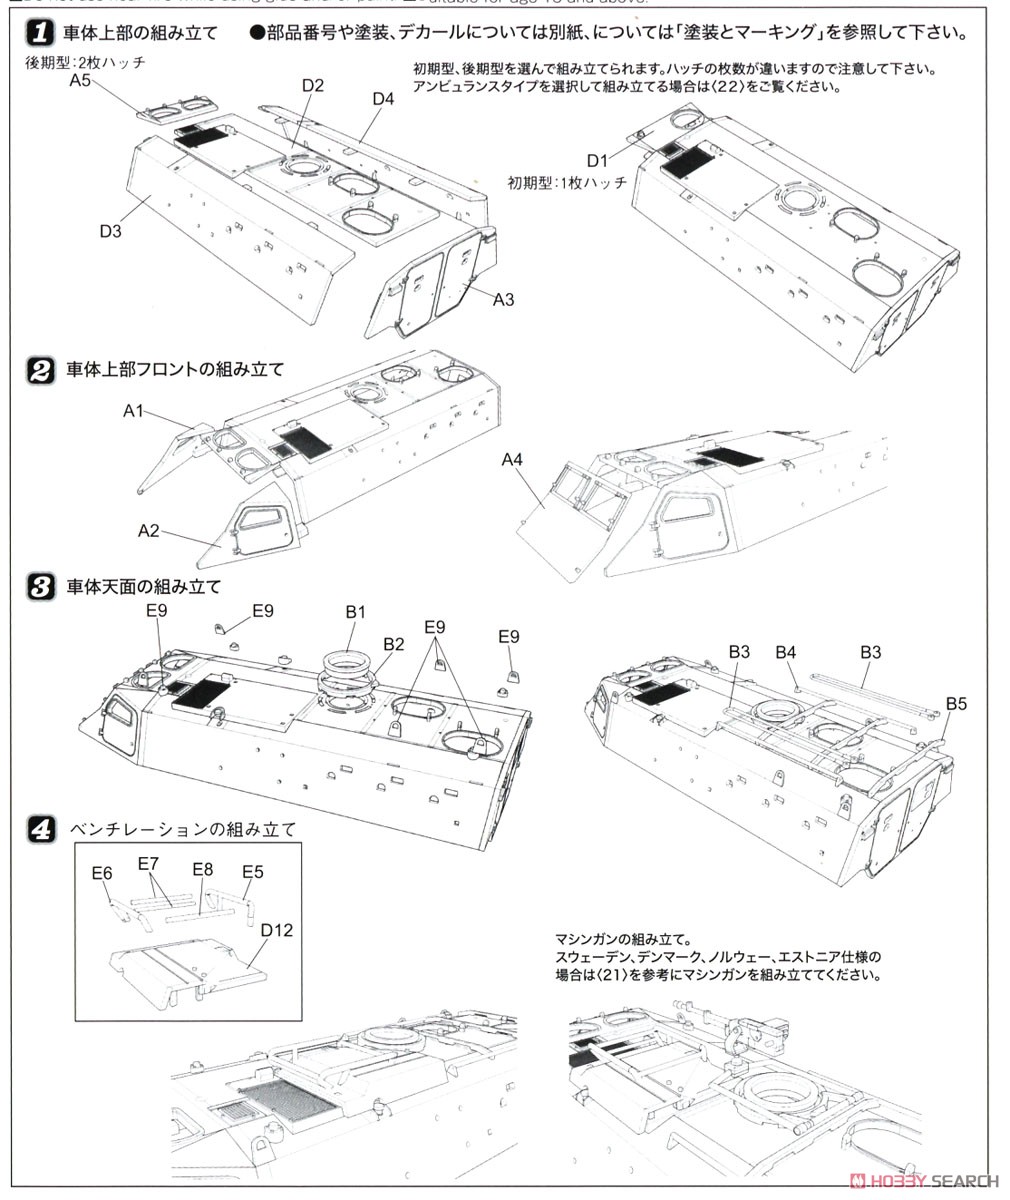 Finnish Defence Forces Sisu xa-180 (Plastic model) Assembly guide1